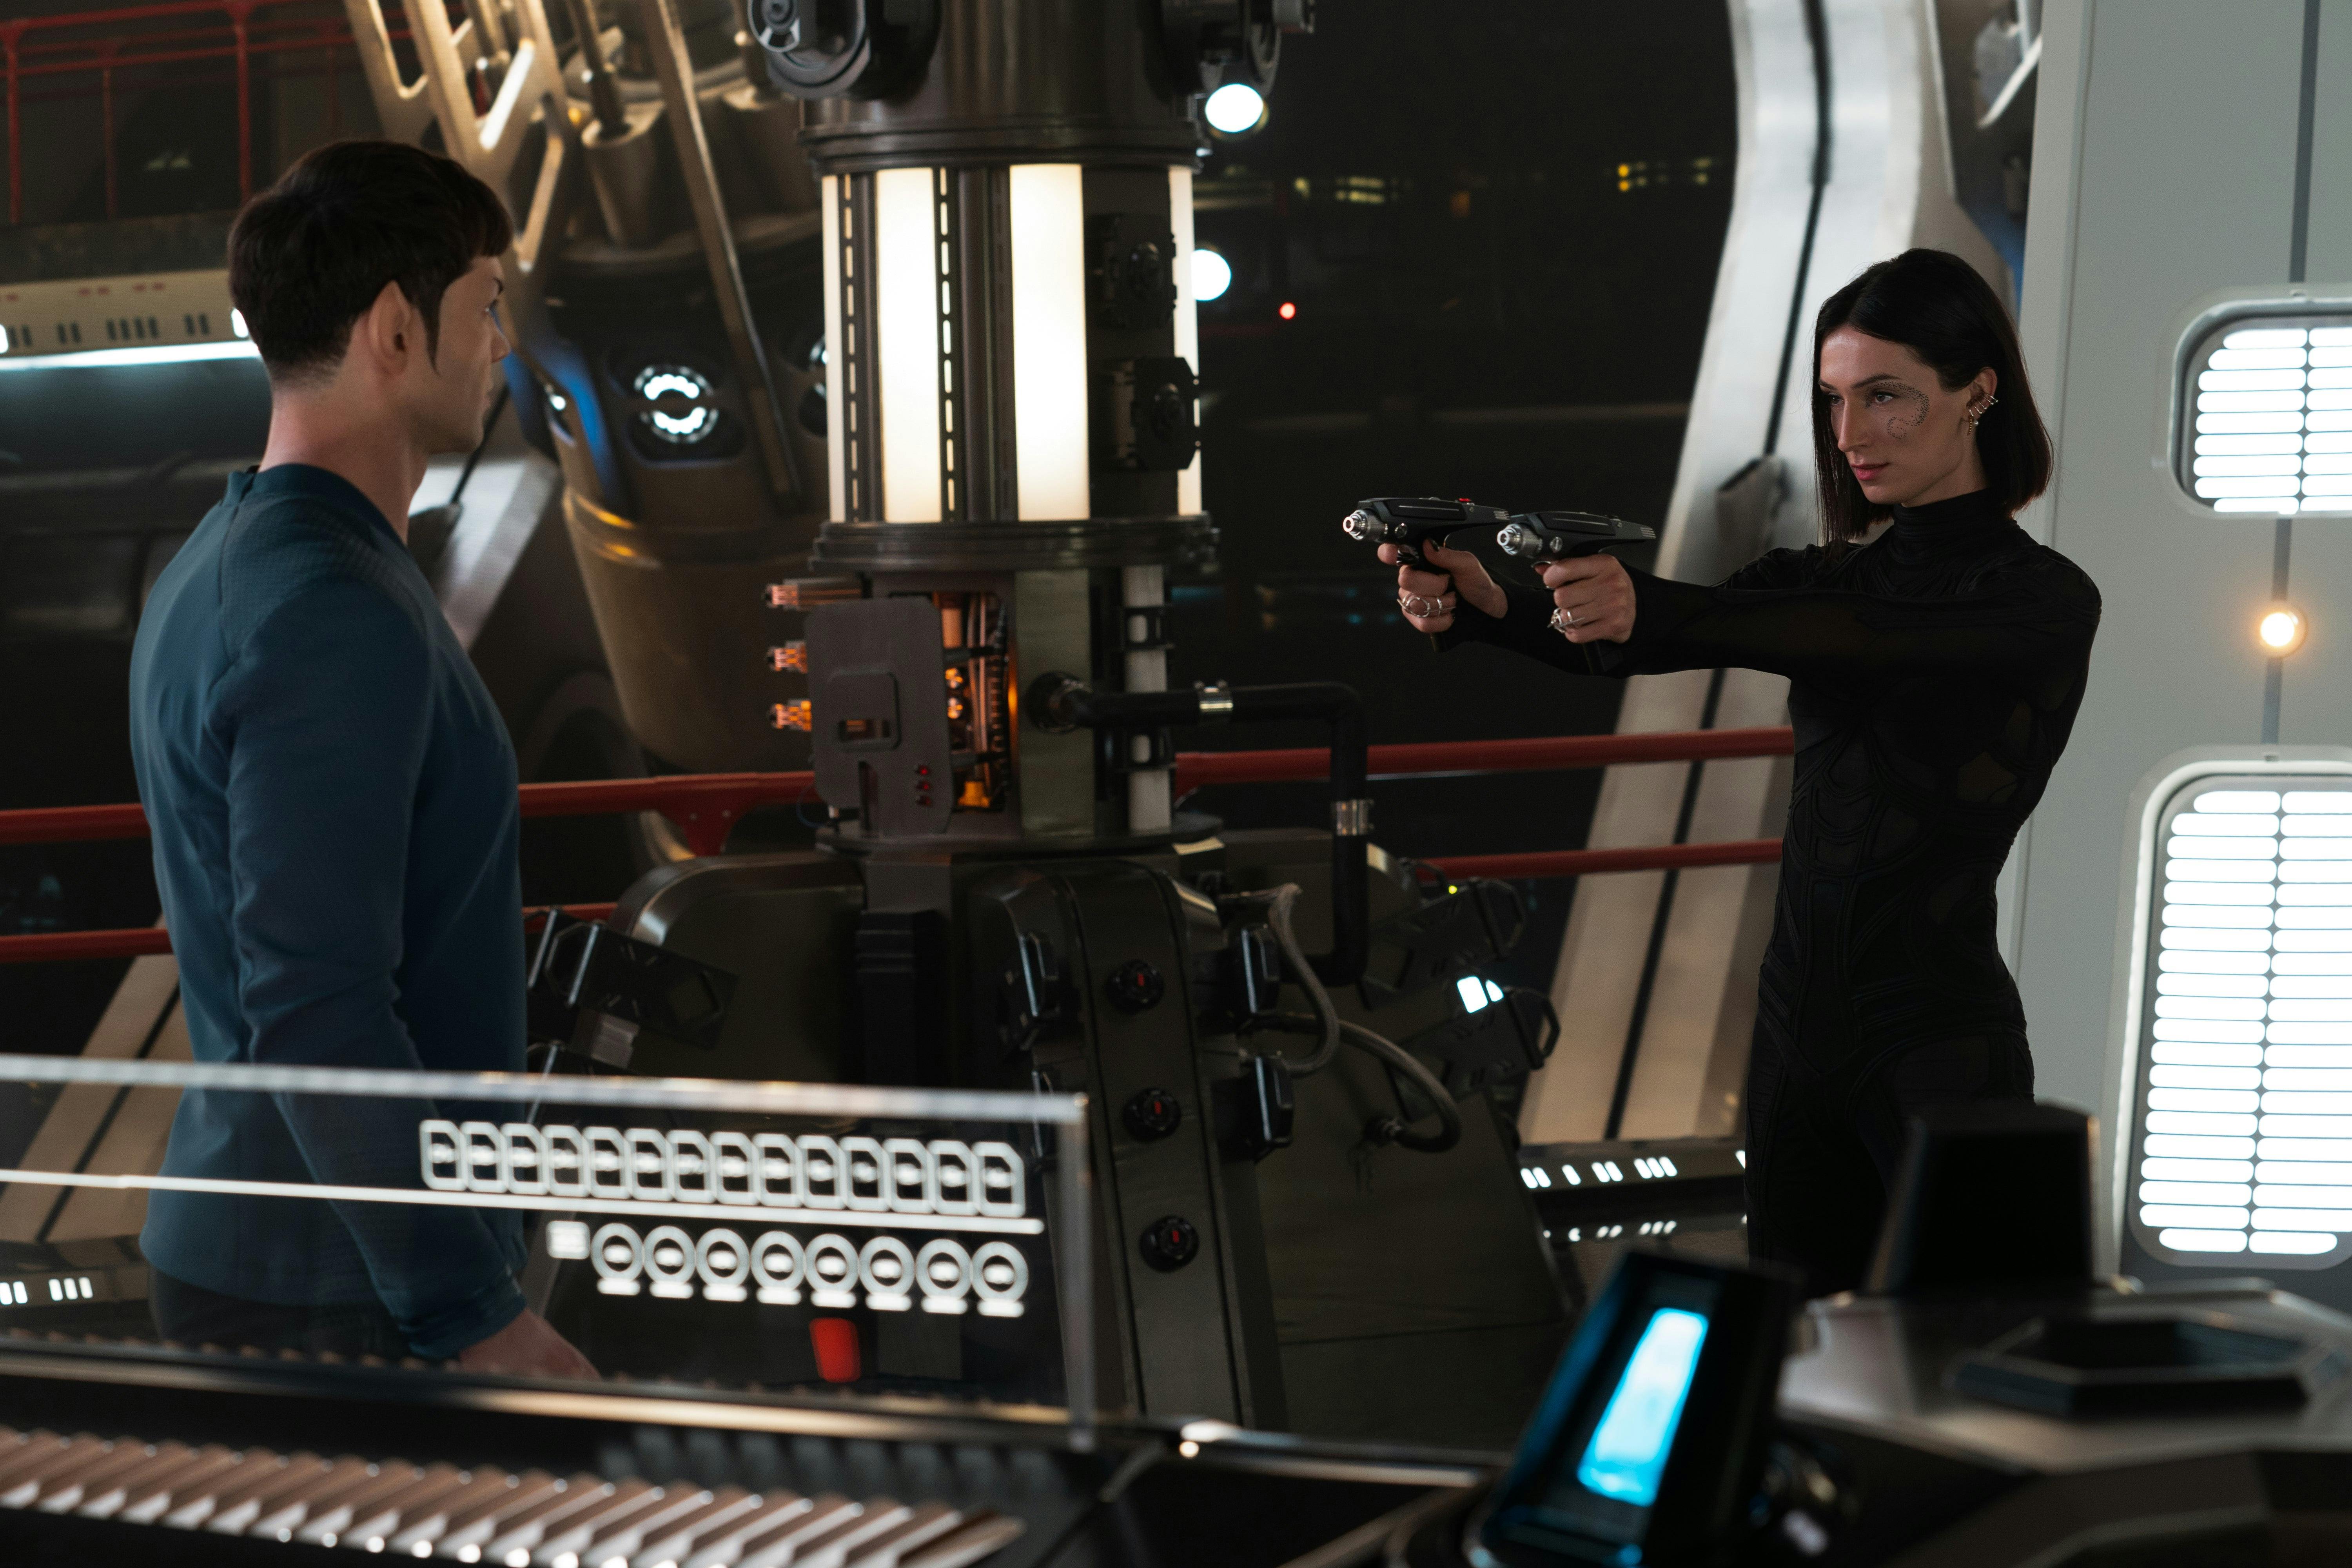 Dr. Aspen (Jesse James Keitel) stands with two phasers aimed at Spock (Ethan Peck), who's back is to the camera.